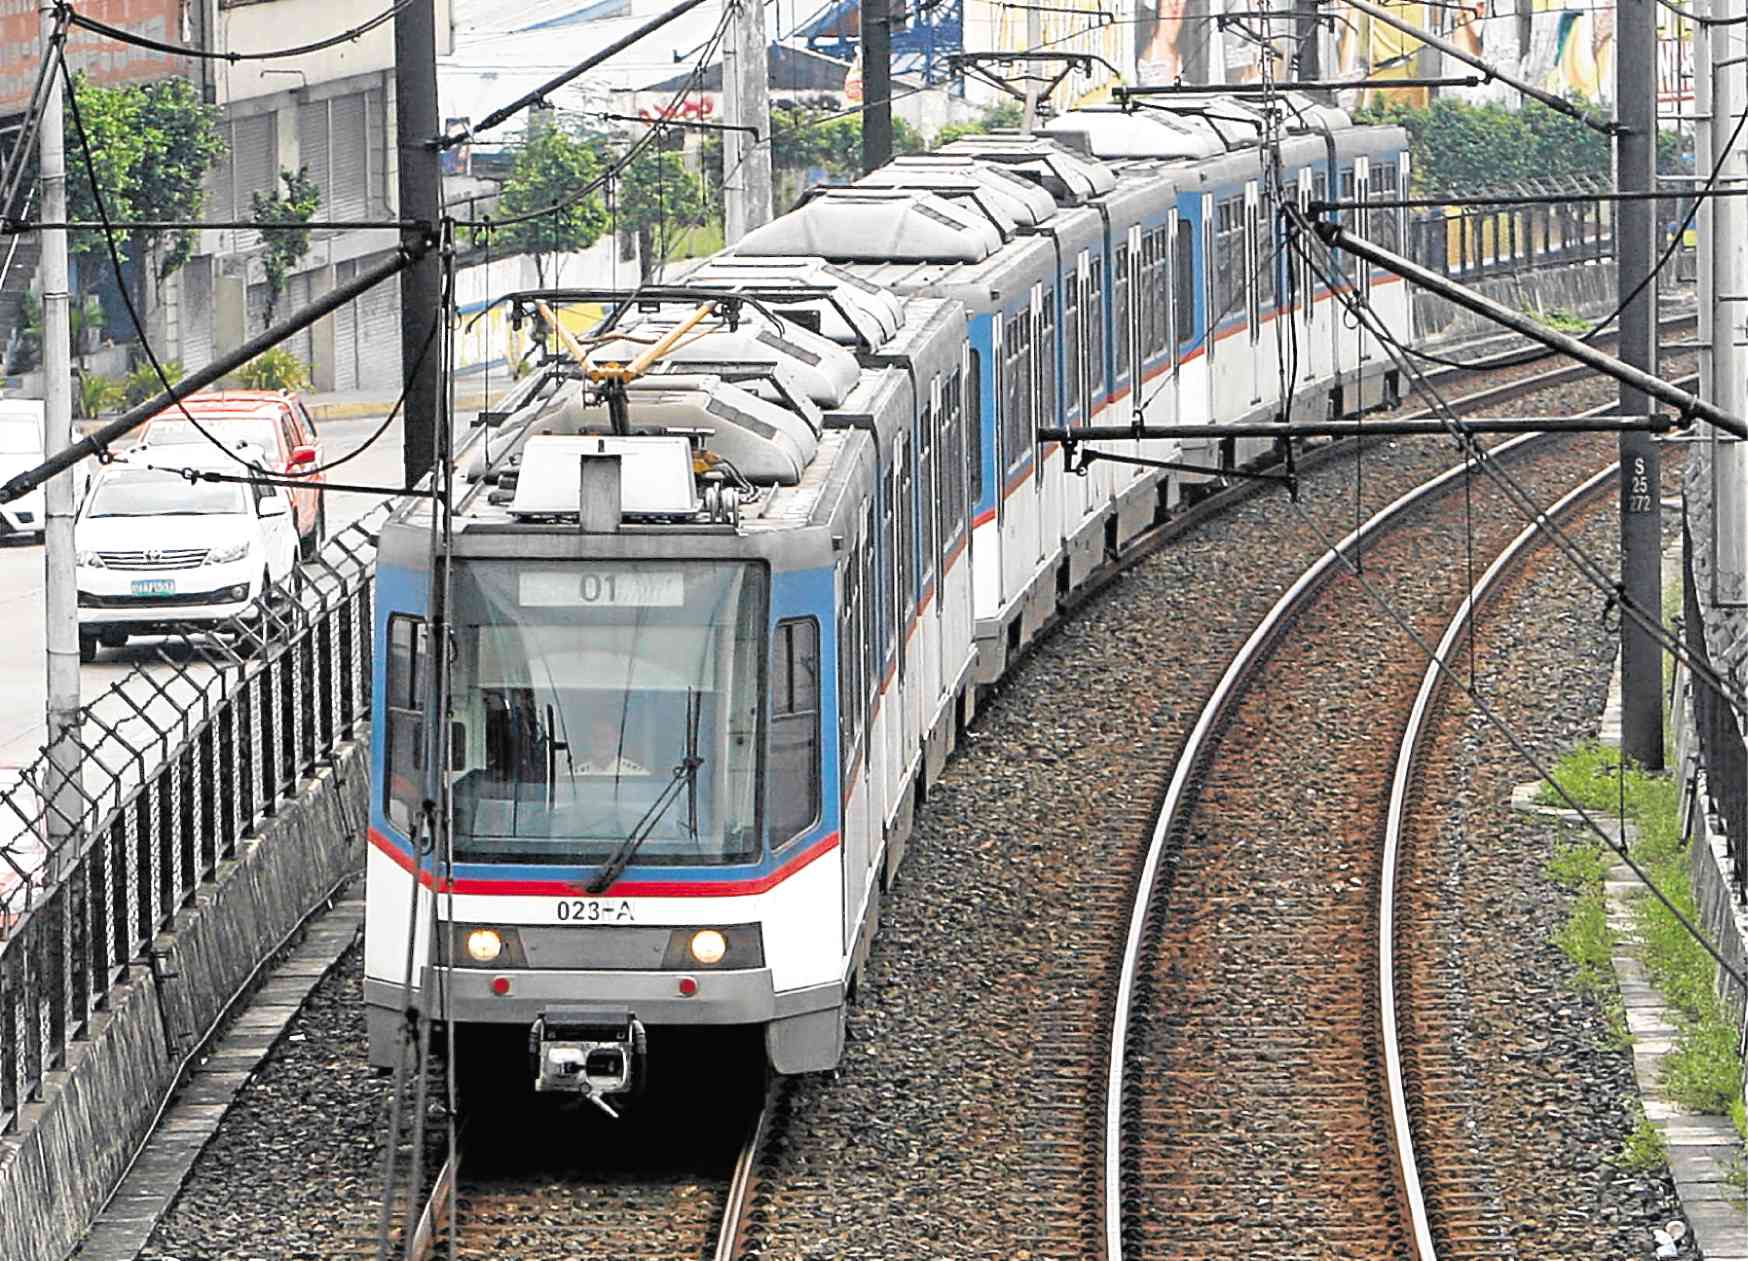 MRT-3 undergoes ‘rail grinding’ to ‘control effects of rail fatigue’